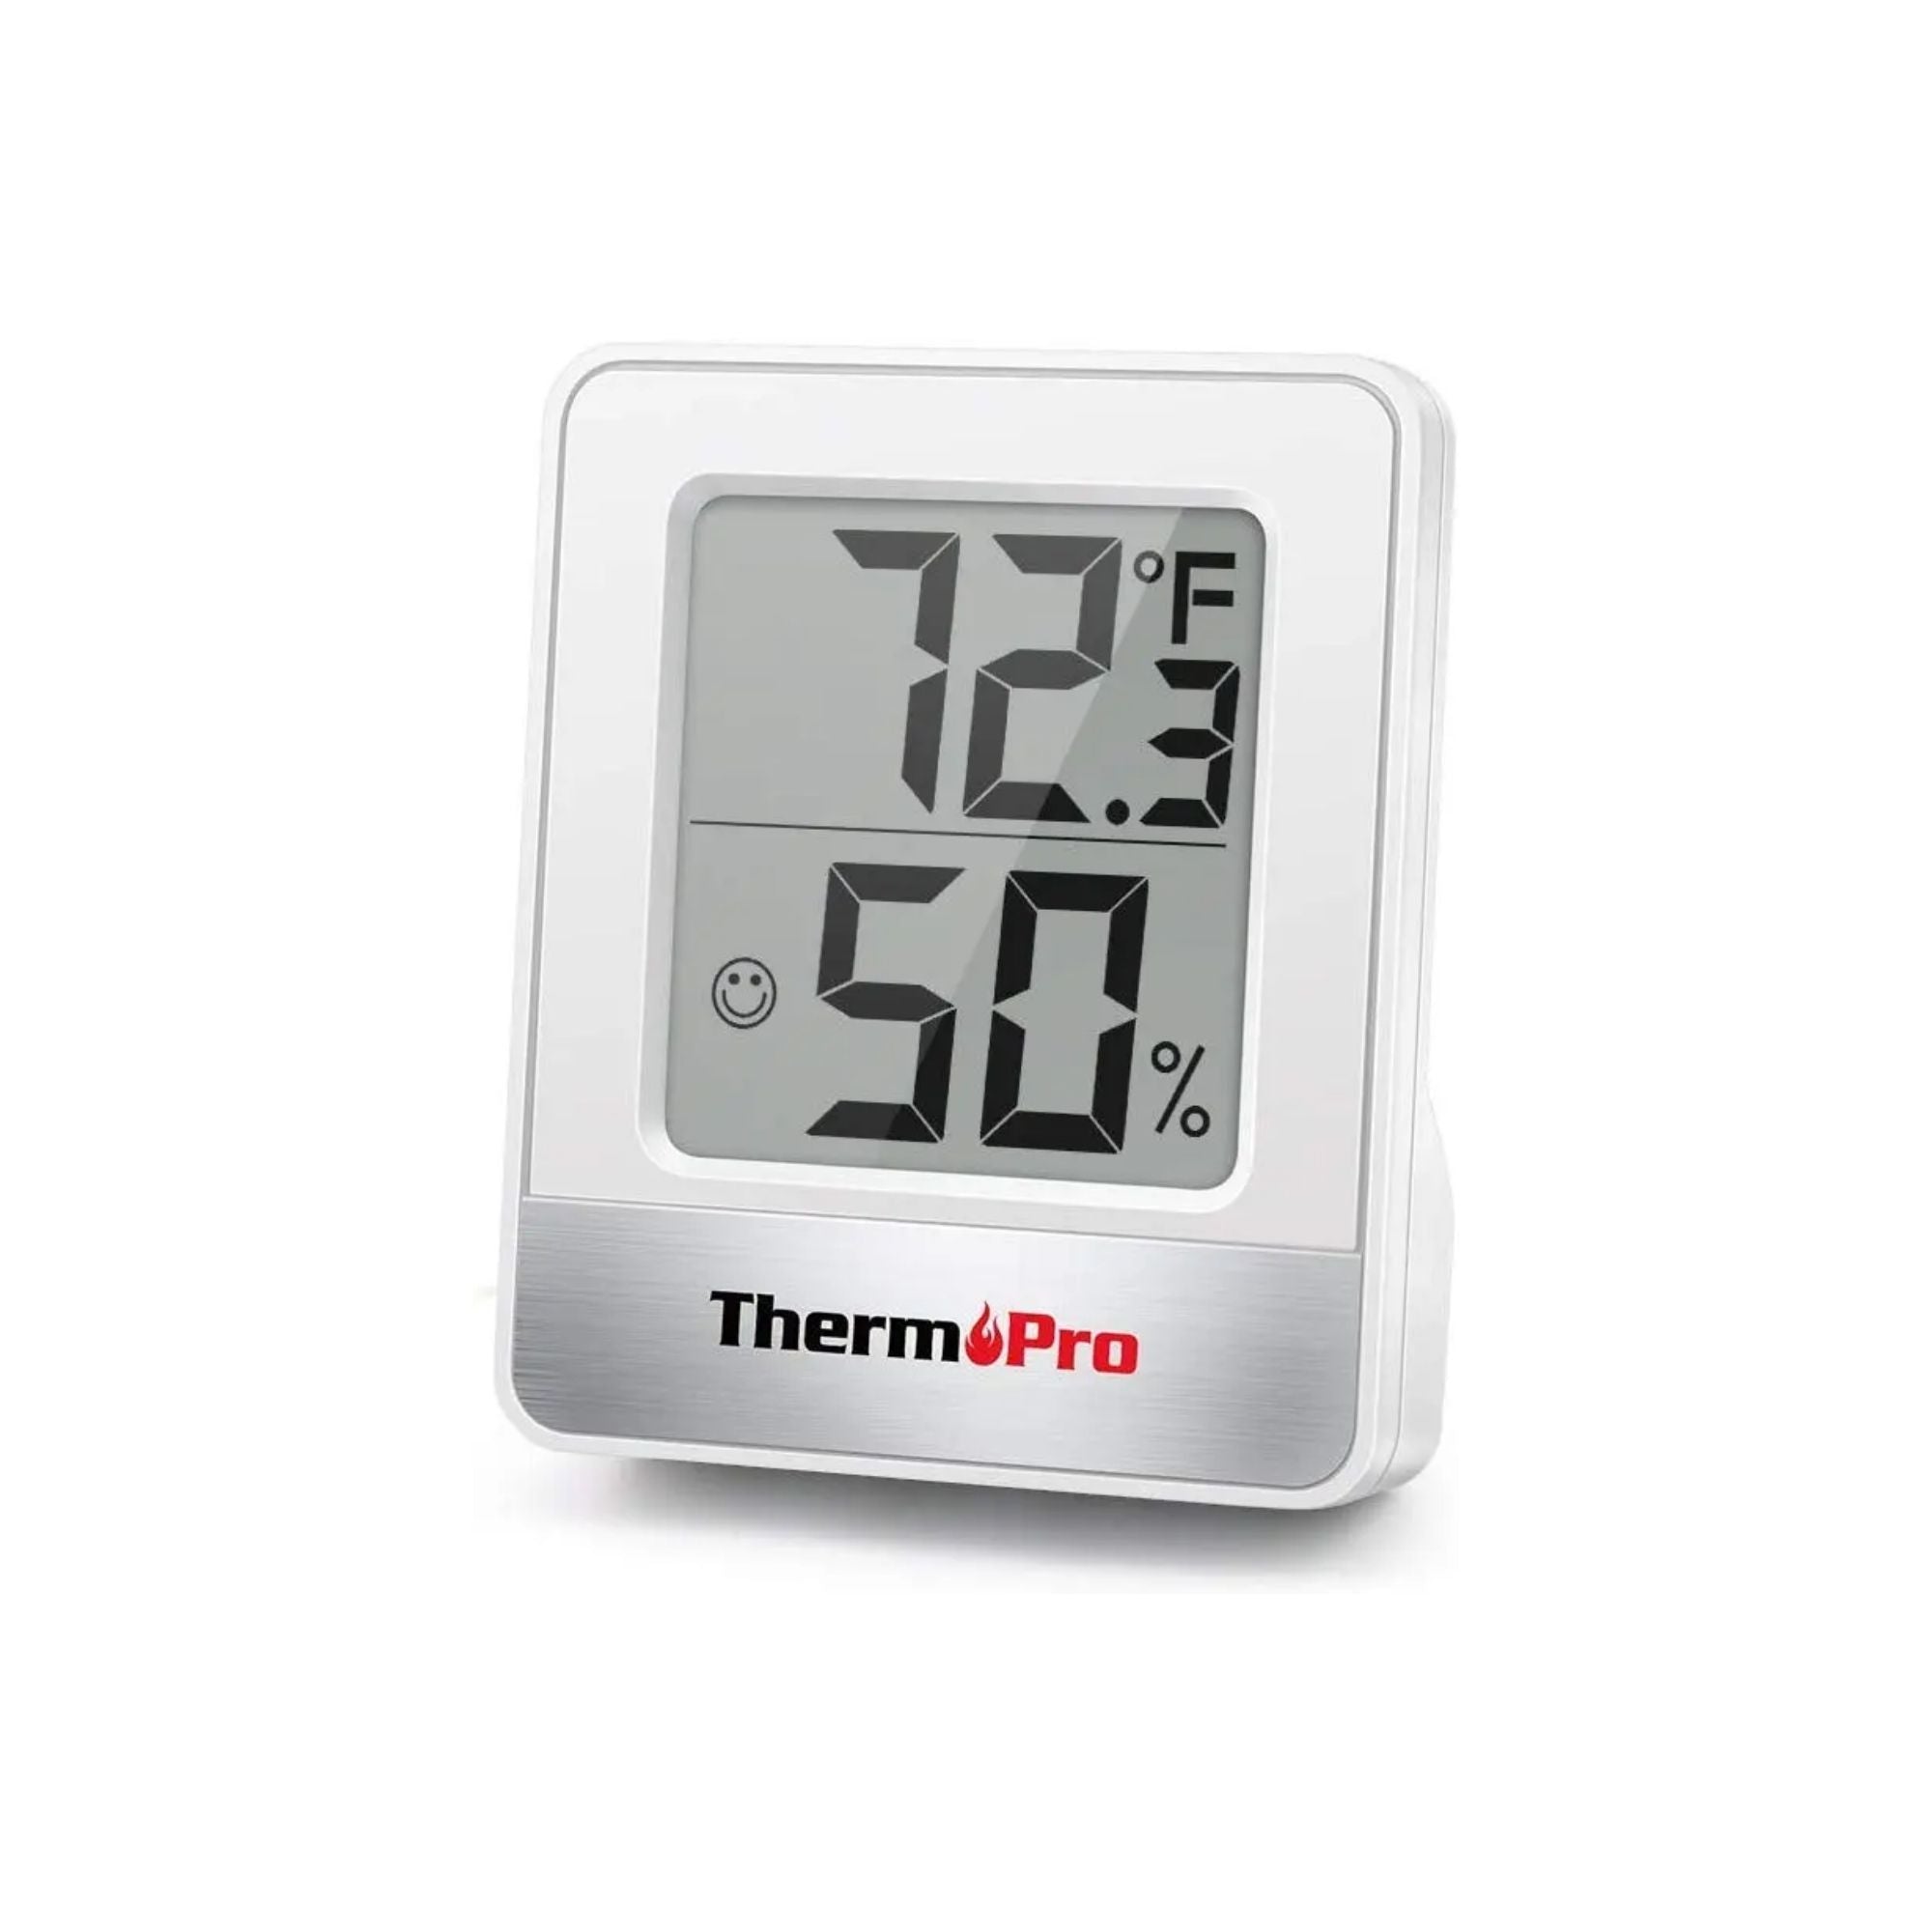 TP 49 Thermometer Hygrometer ThermoPro Hatching Time